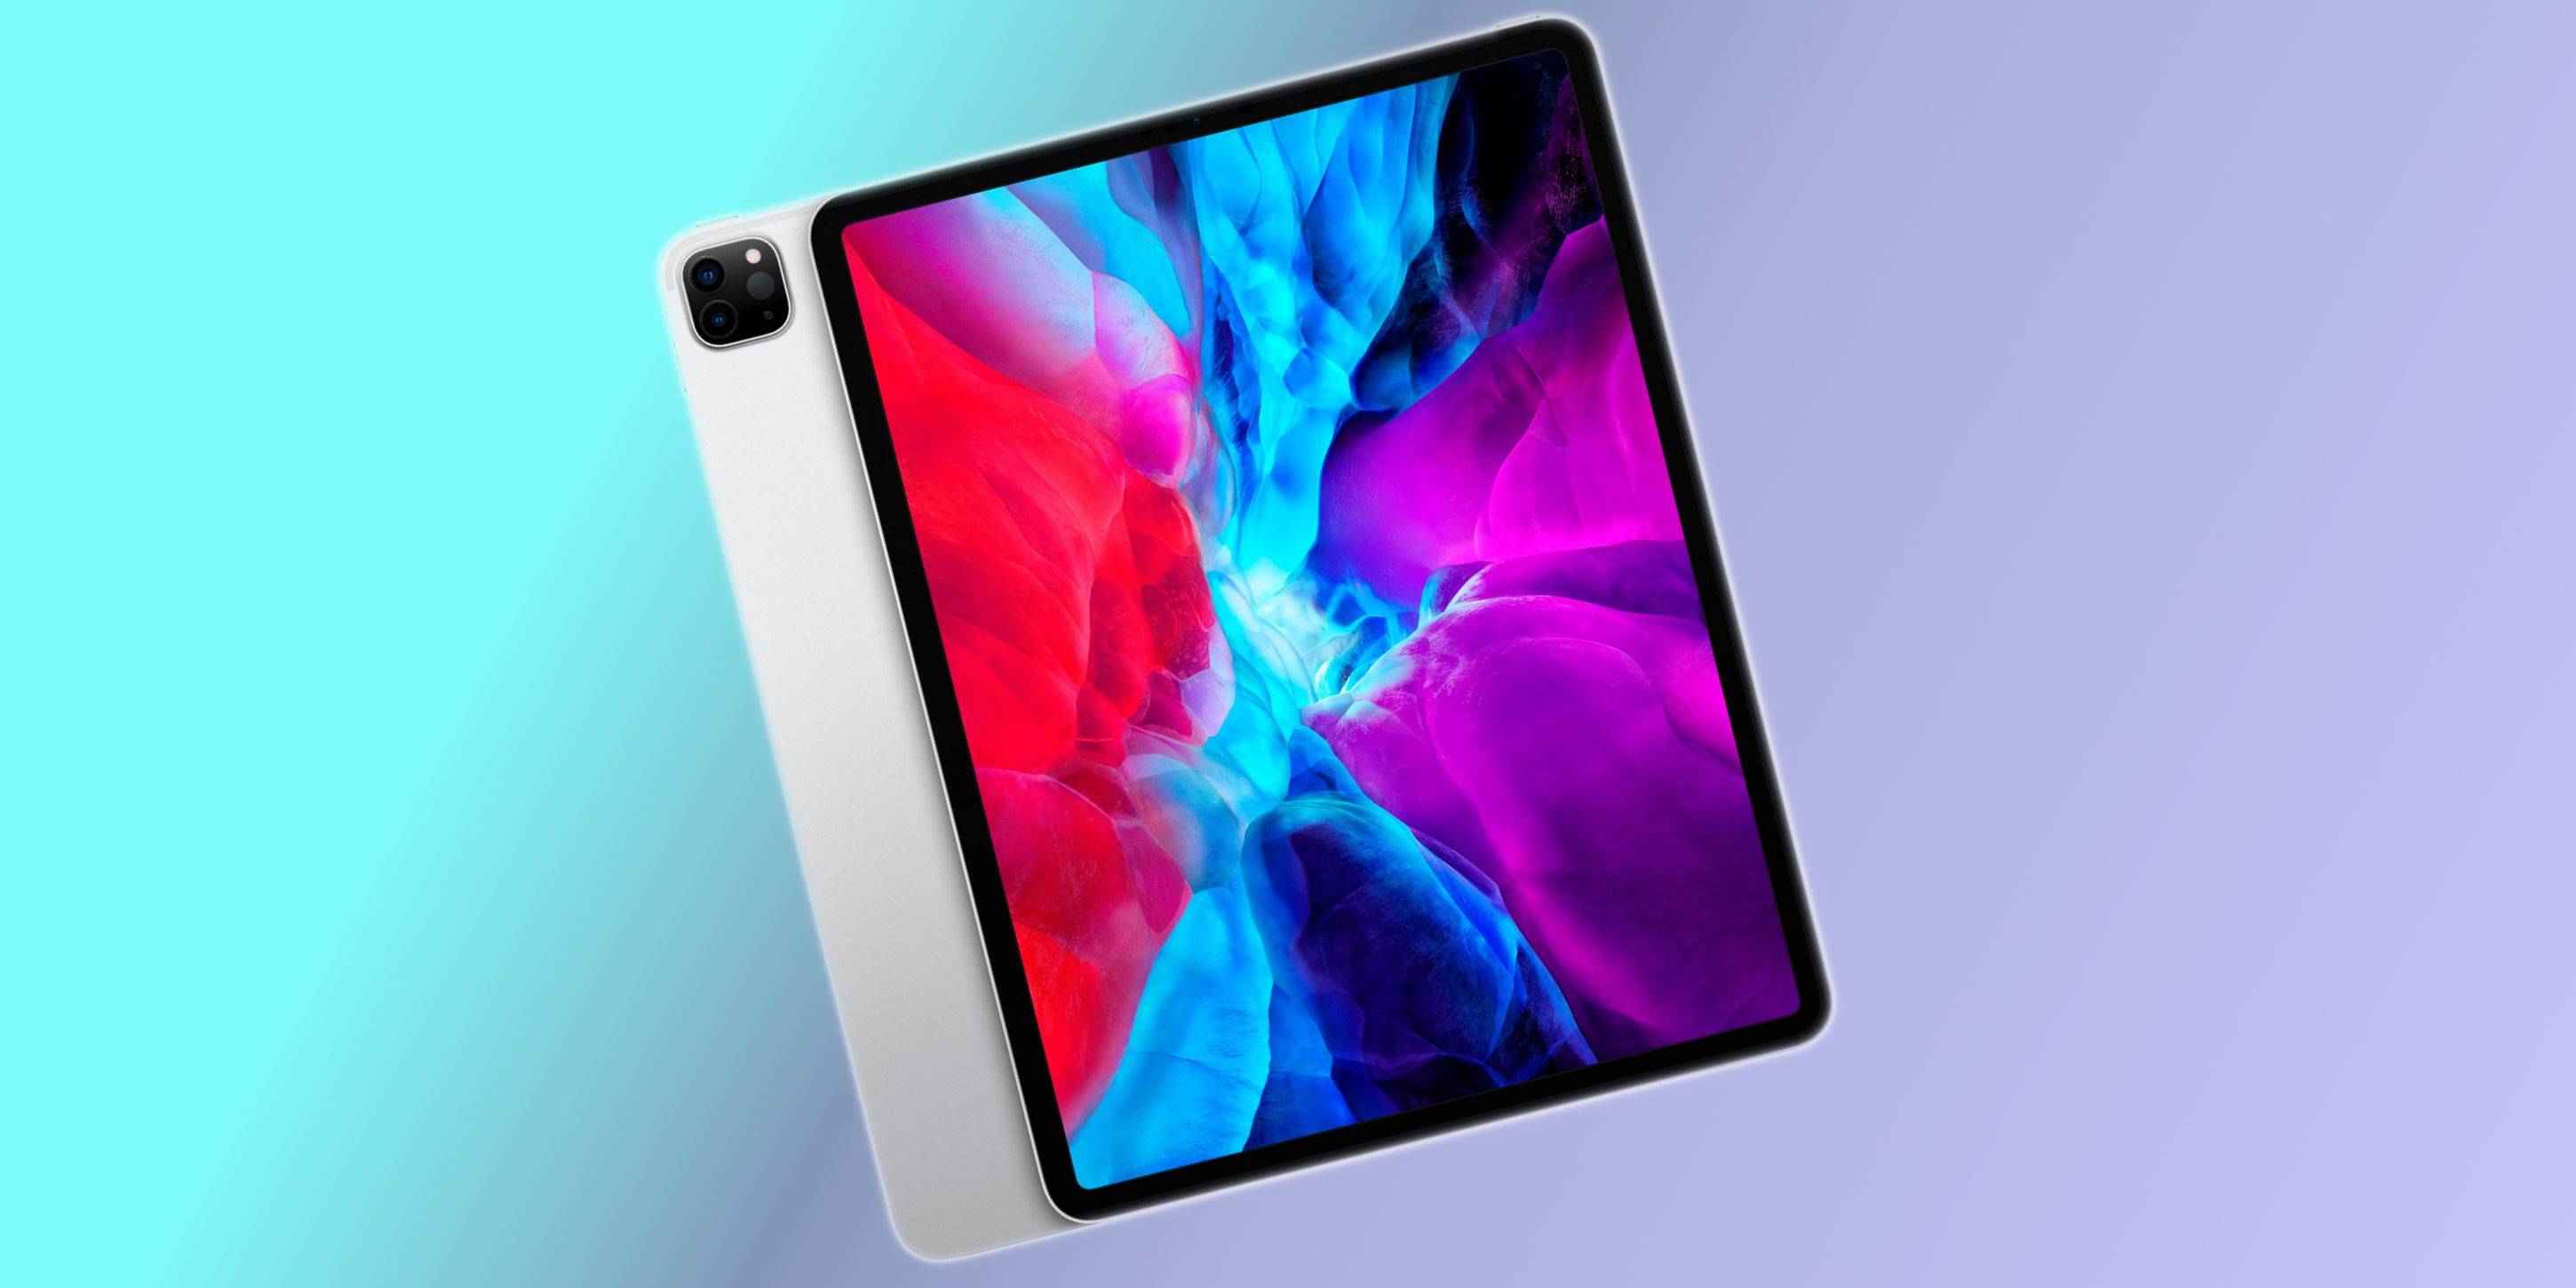 Apple Gears Up For 3nm Chip Inside 2022 iPad